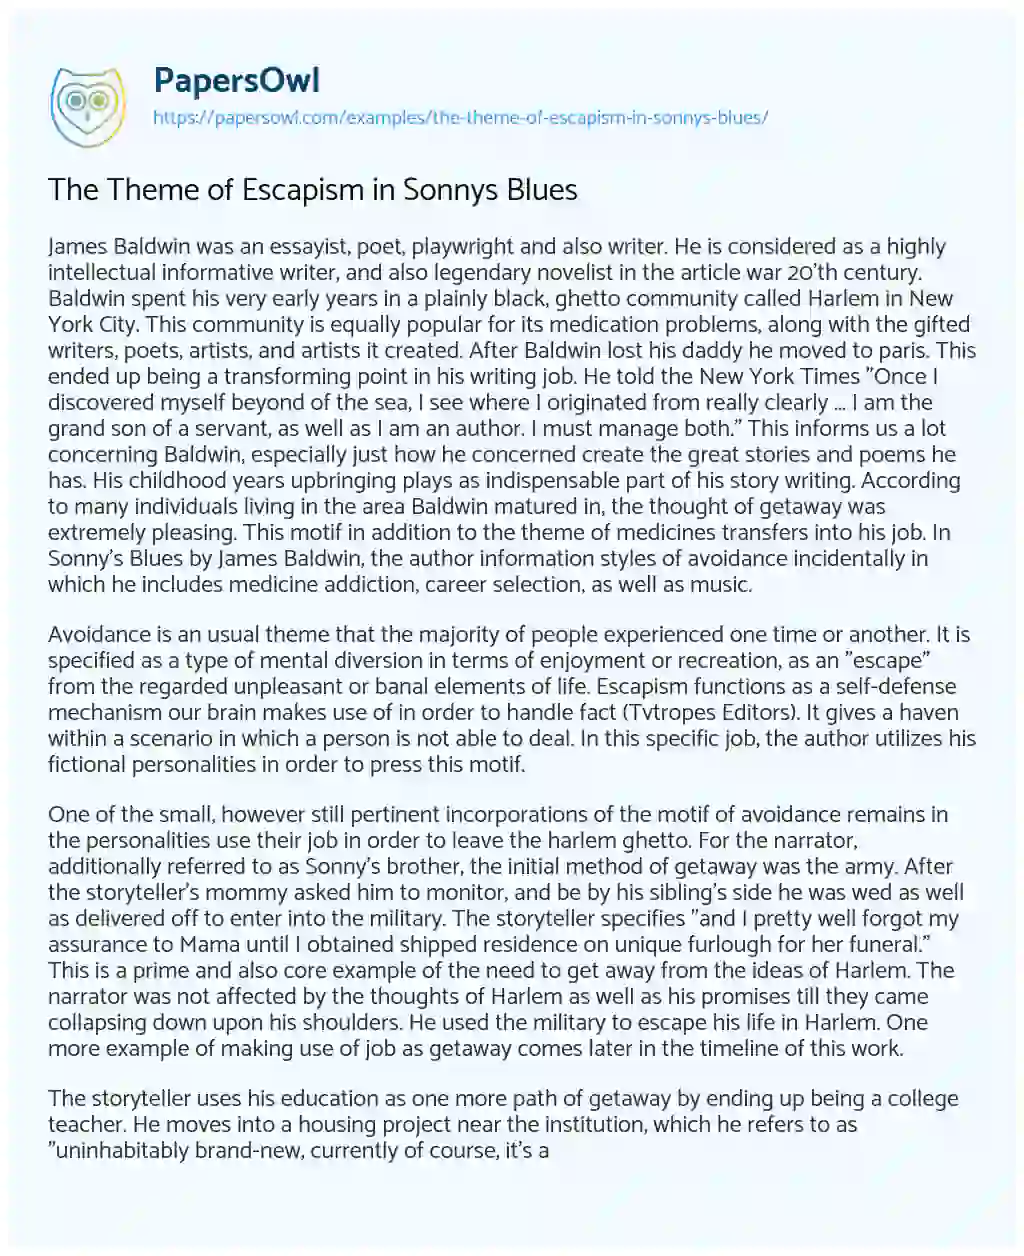 Essay on The Theme of Escapism in Sonnys Blues